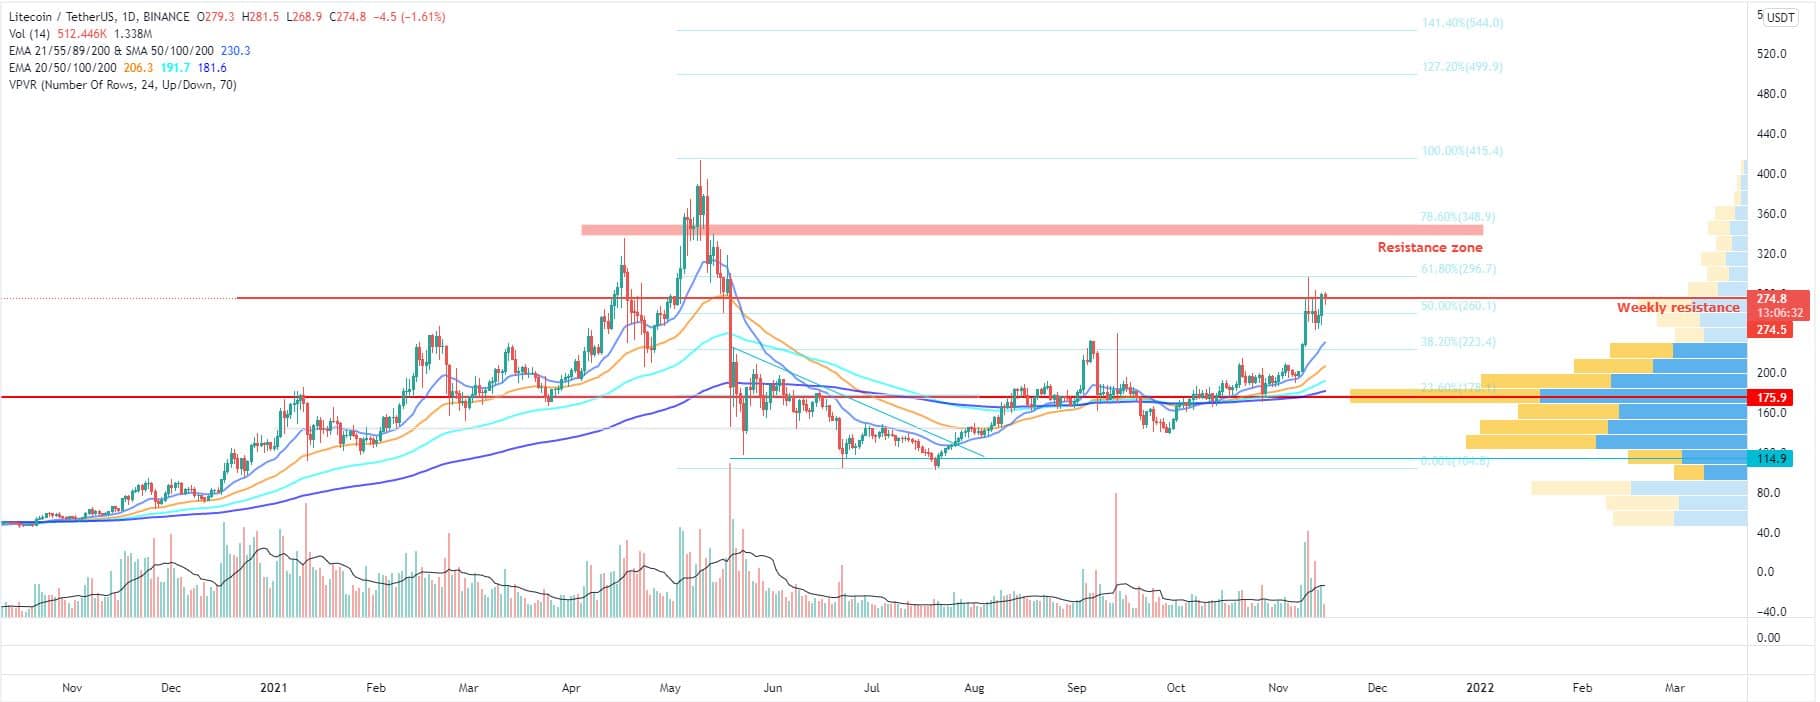 Bitcoin, Ether, Major Altcoins - Weekly Market Update November 15, 2021 - 3